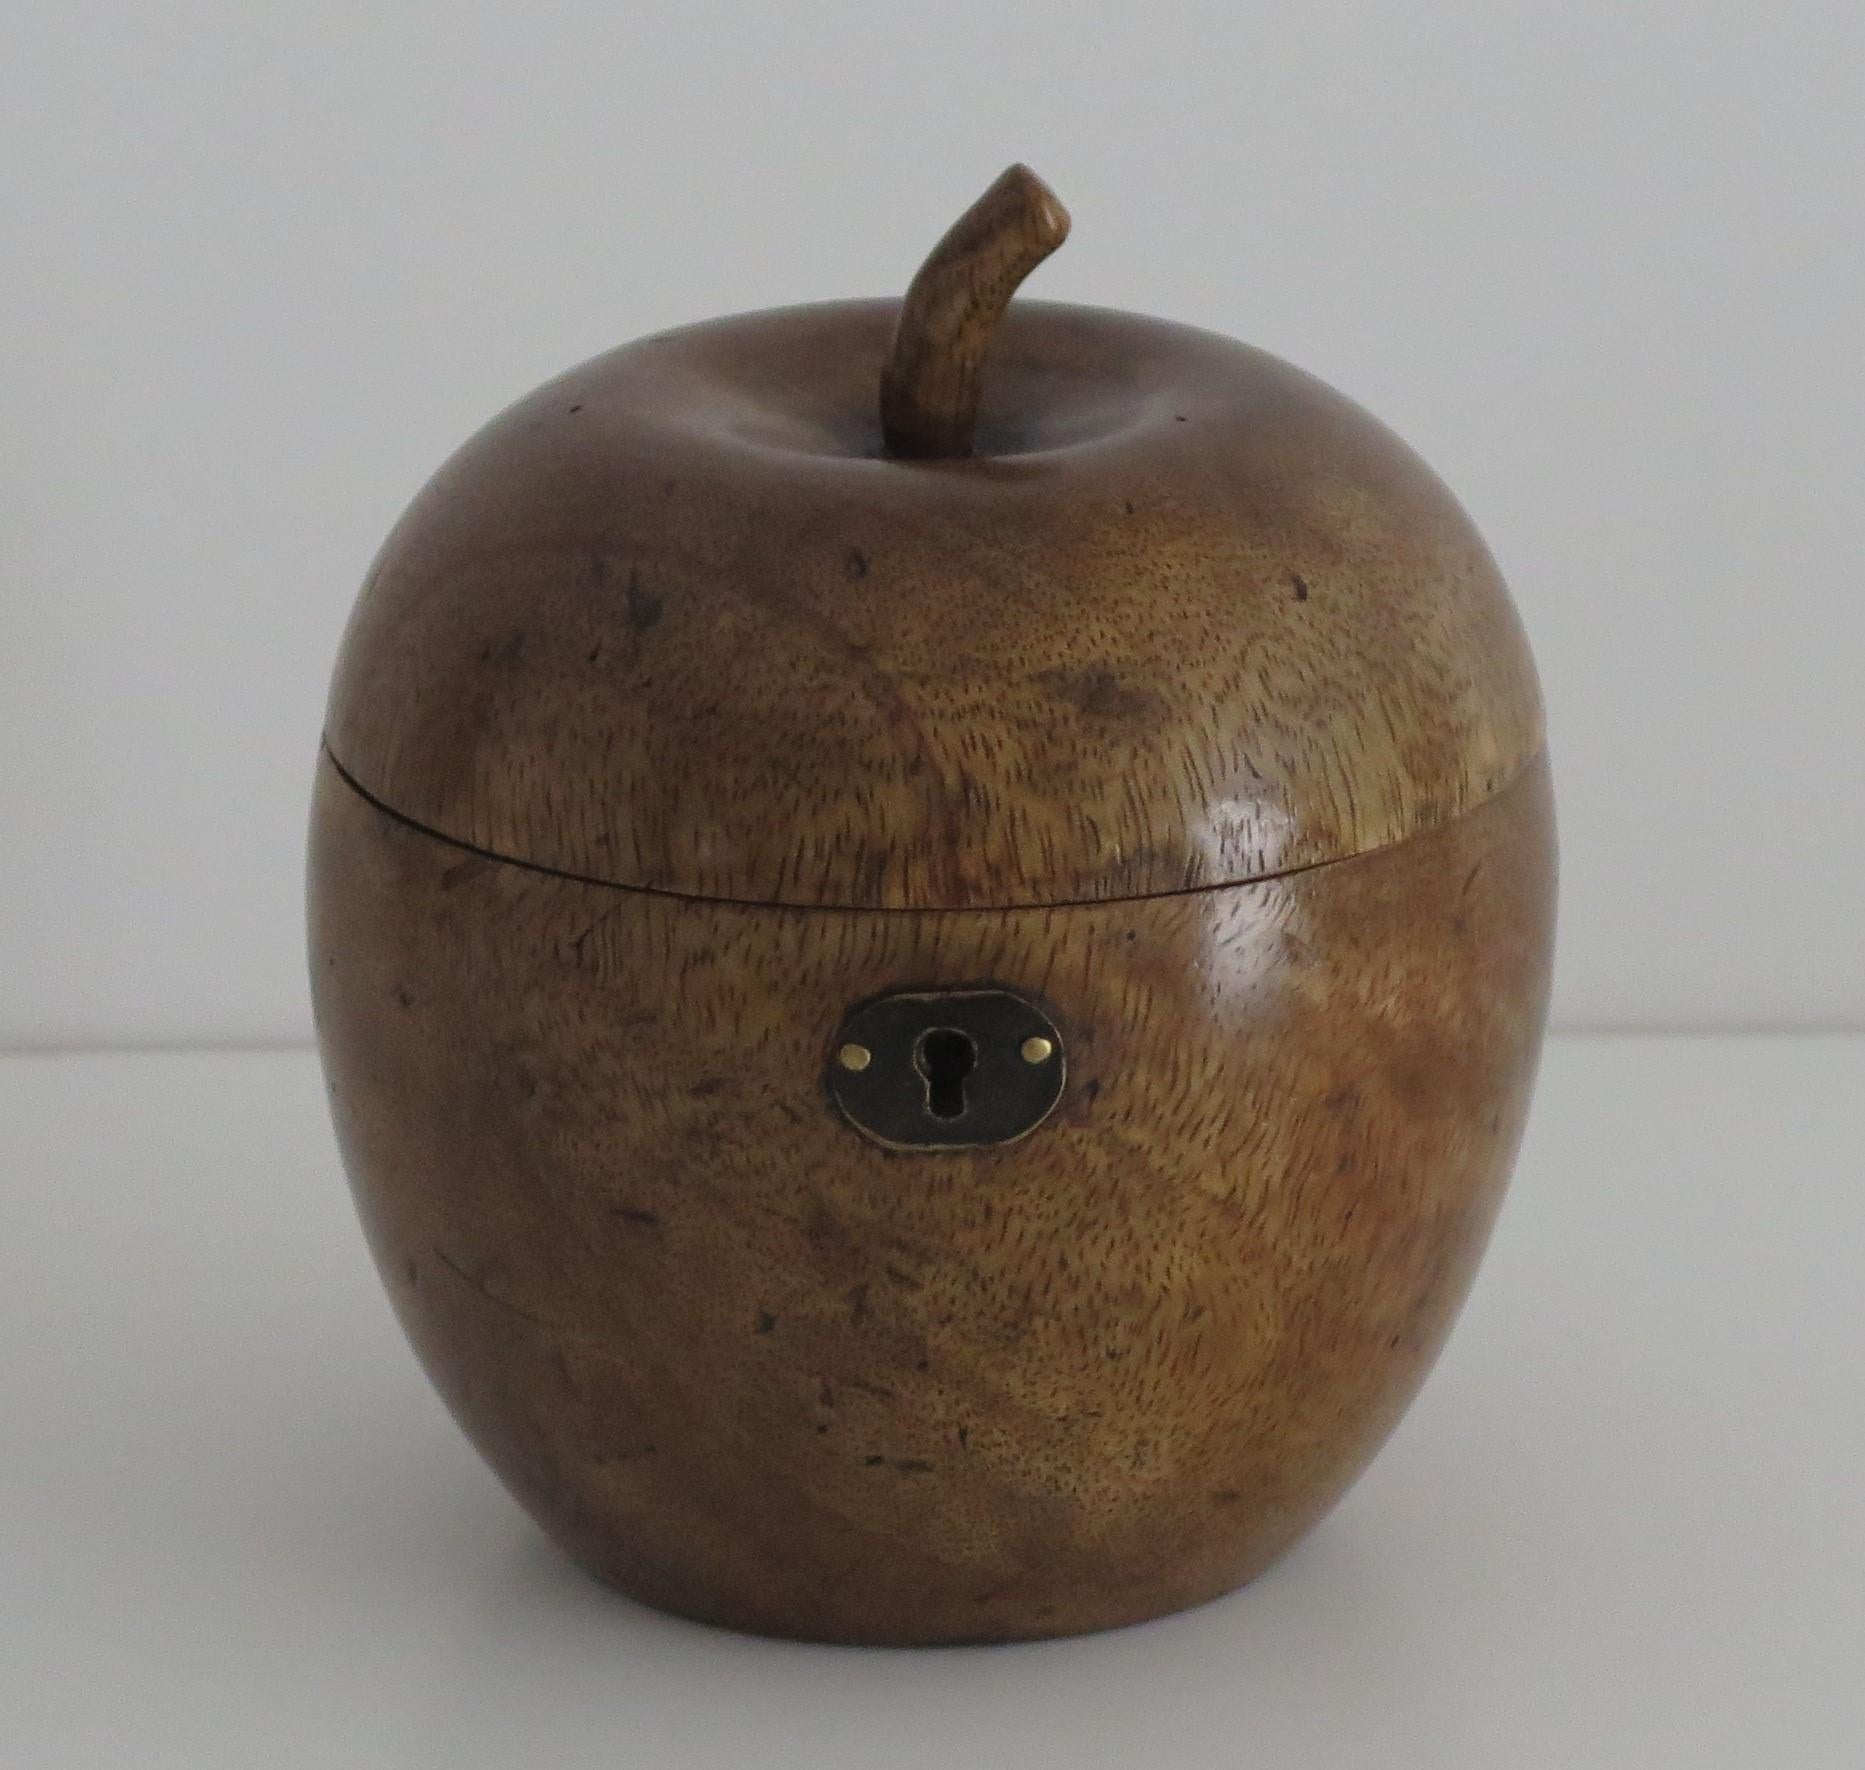 This is a hand made tea caddy Lidded box in the shape of an Apple, made from hardwood and dating to the 19th century.

The Apple shaped box has a hinged lid with a short hand carved stalk. The lid has a brass hinge and lock (sorry no key). The